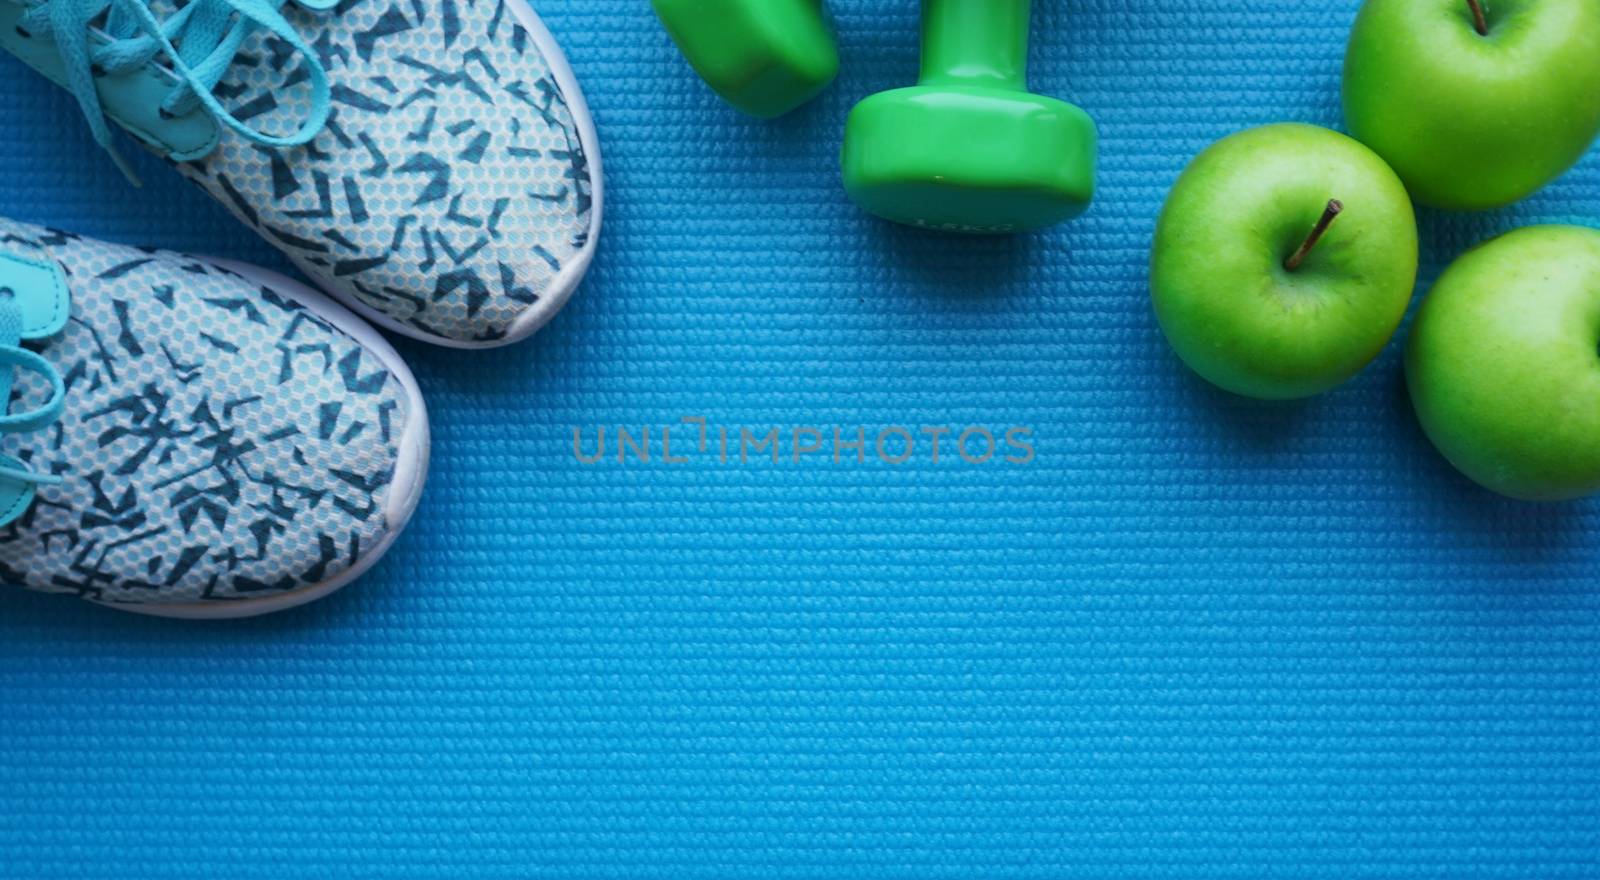 Sneakers, apples and dumbbells fitness on a blue background. by natali_brill